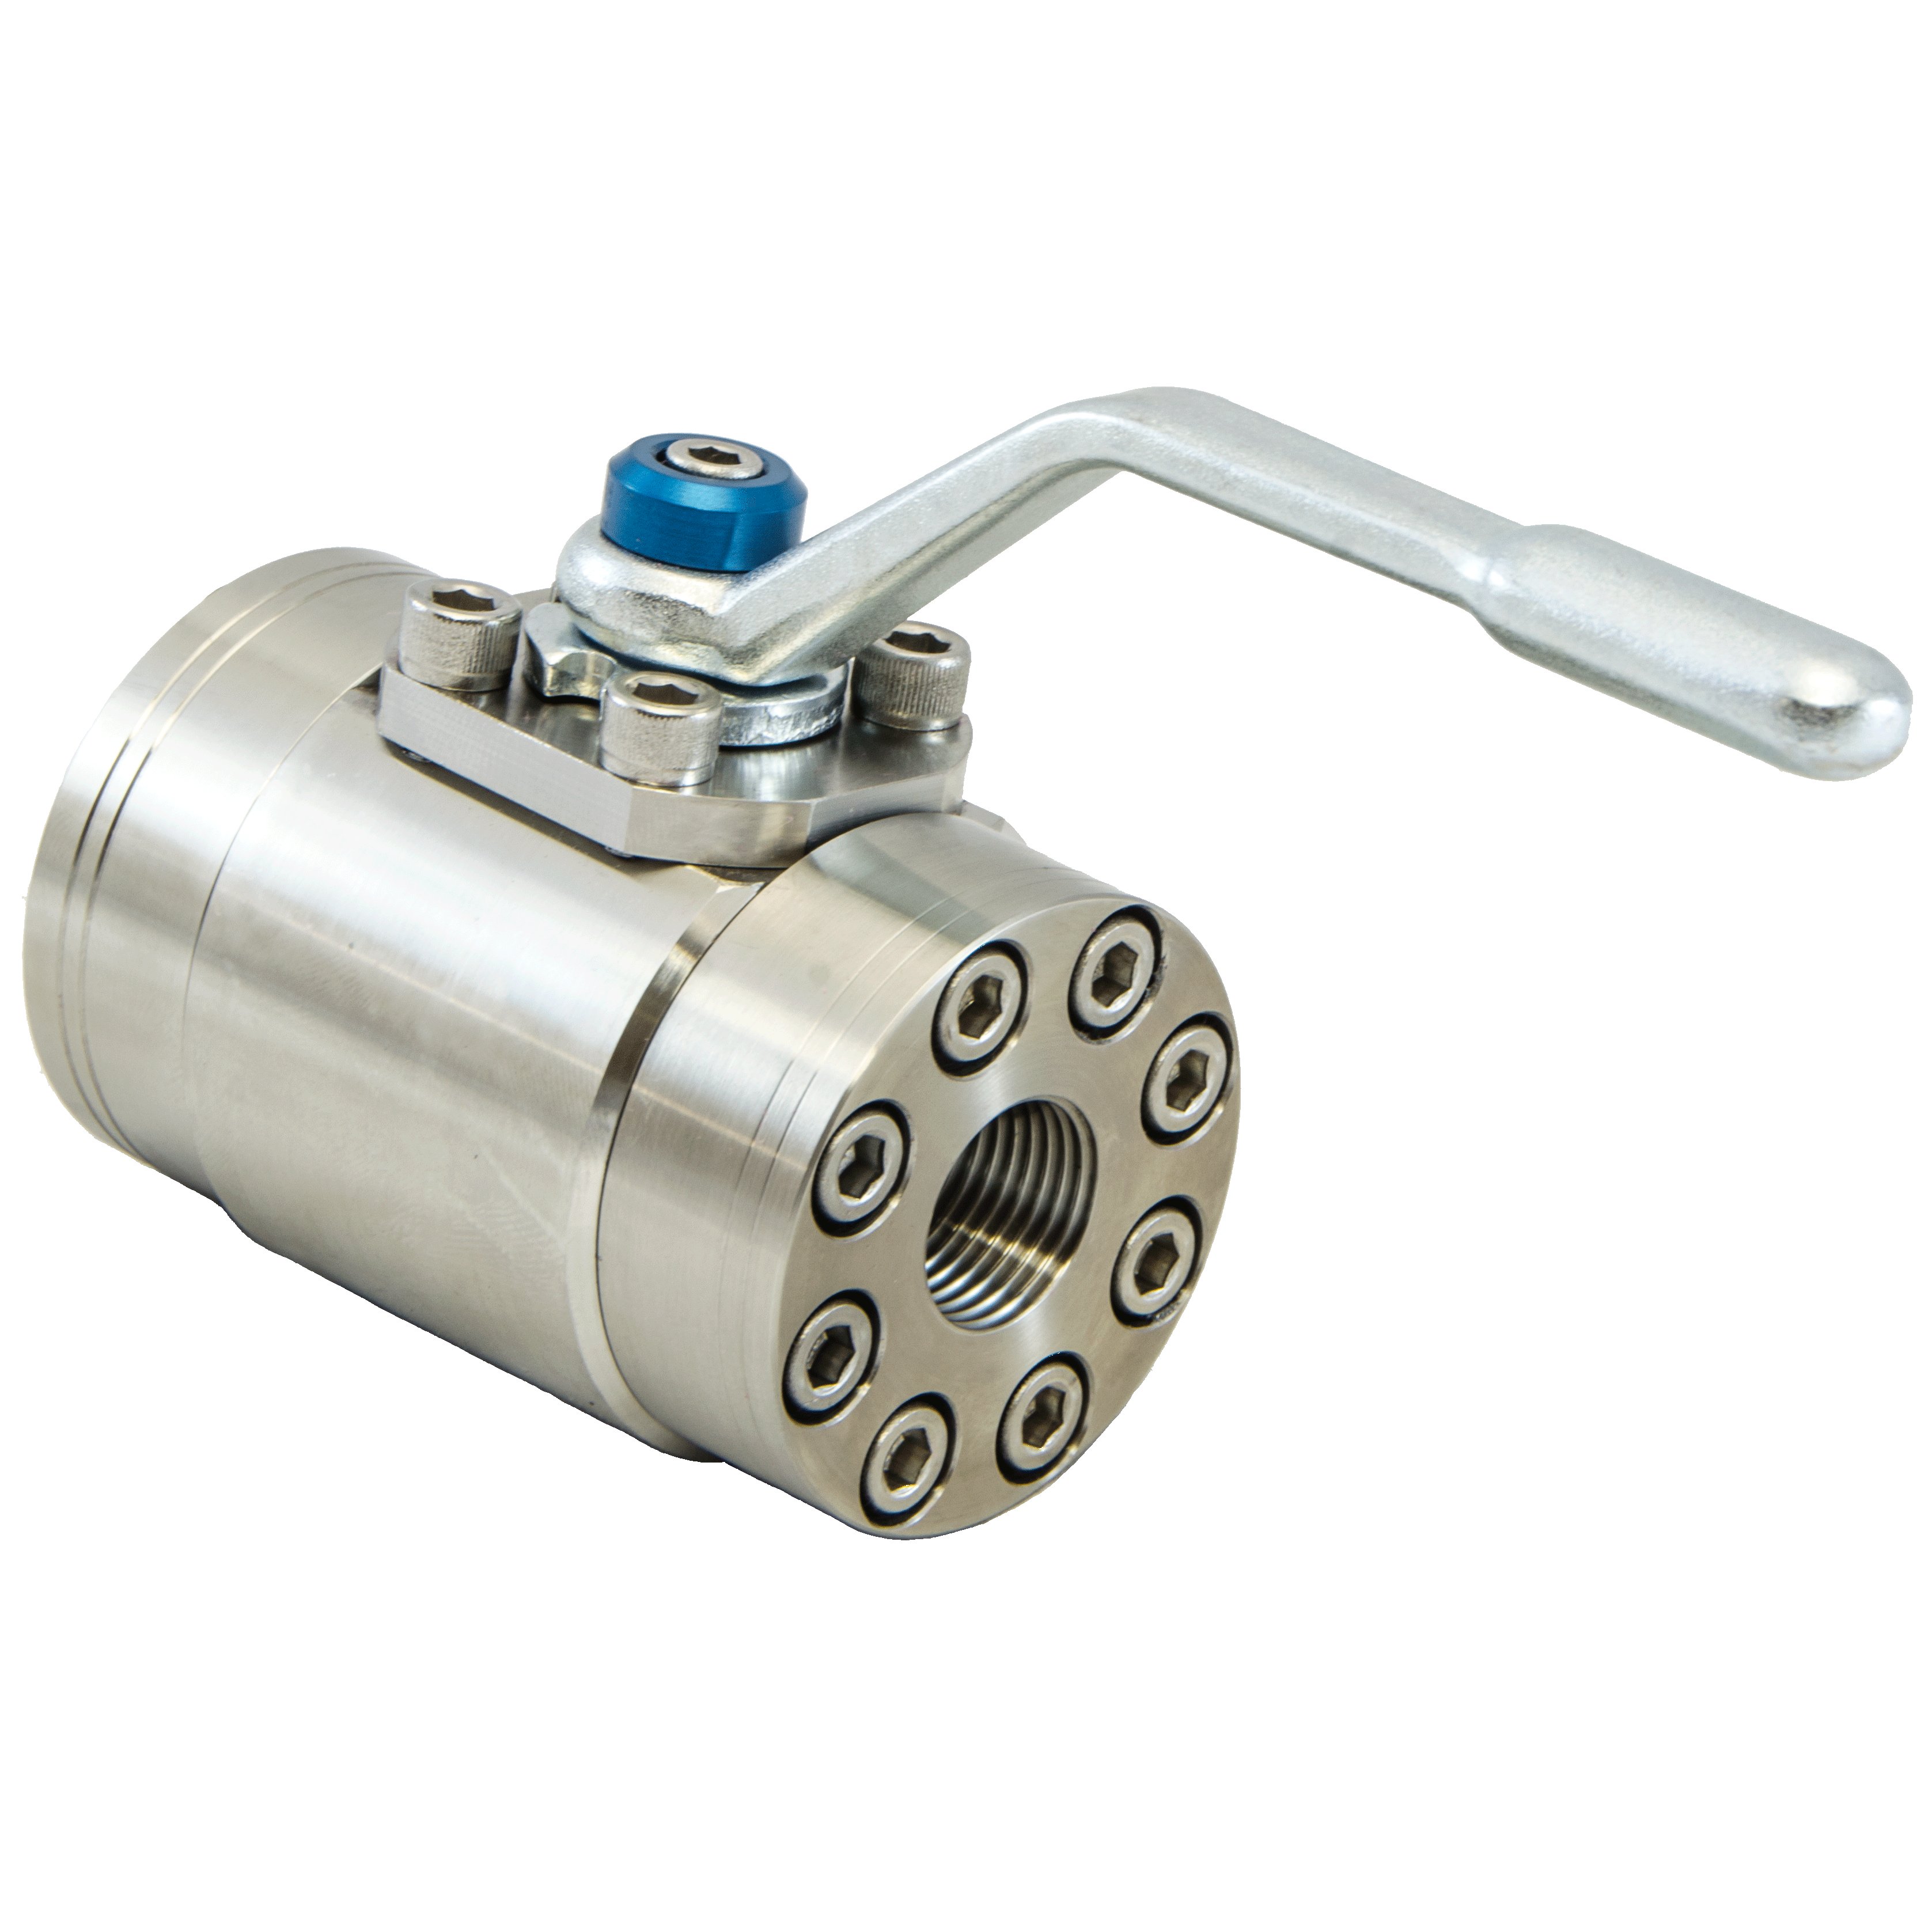 BVQG-0750S-2211 : DMIC Stainless Gas Ball Valve, #12 SAE (3/4), 316 Stainless Steel, 6000psi, Two-Way